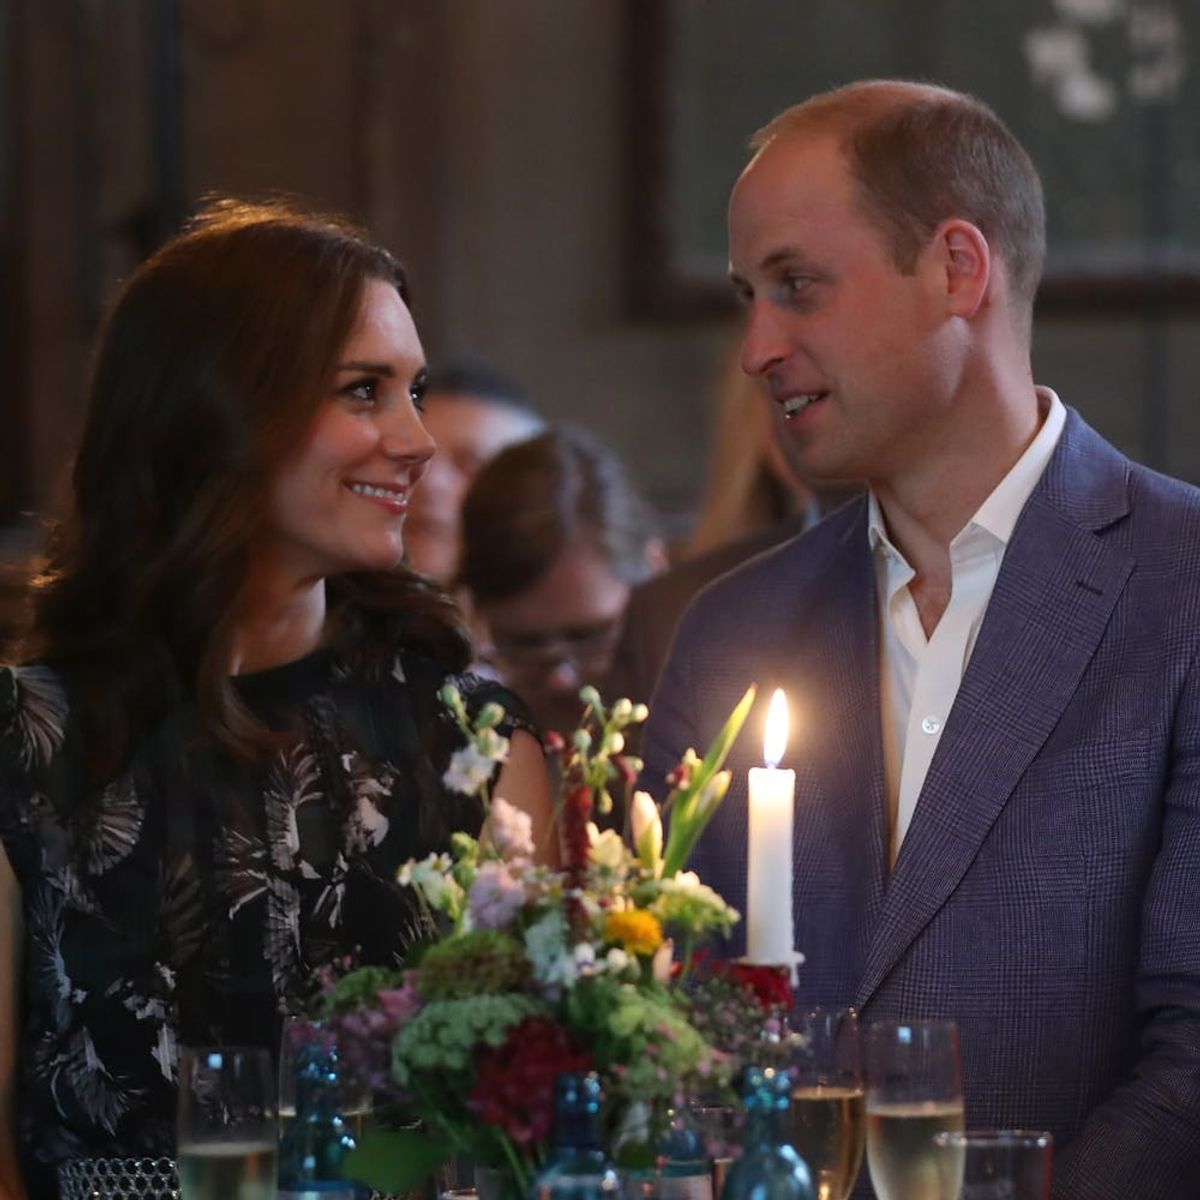 Read All the Very Best Reactions to News of a Third Baby for Kate Middleton and Prince William